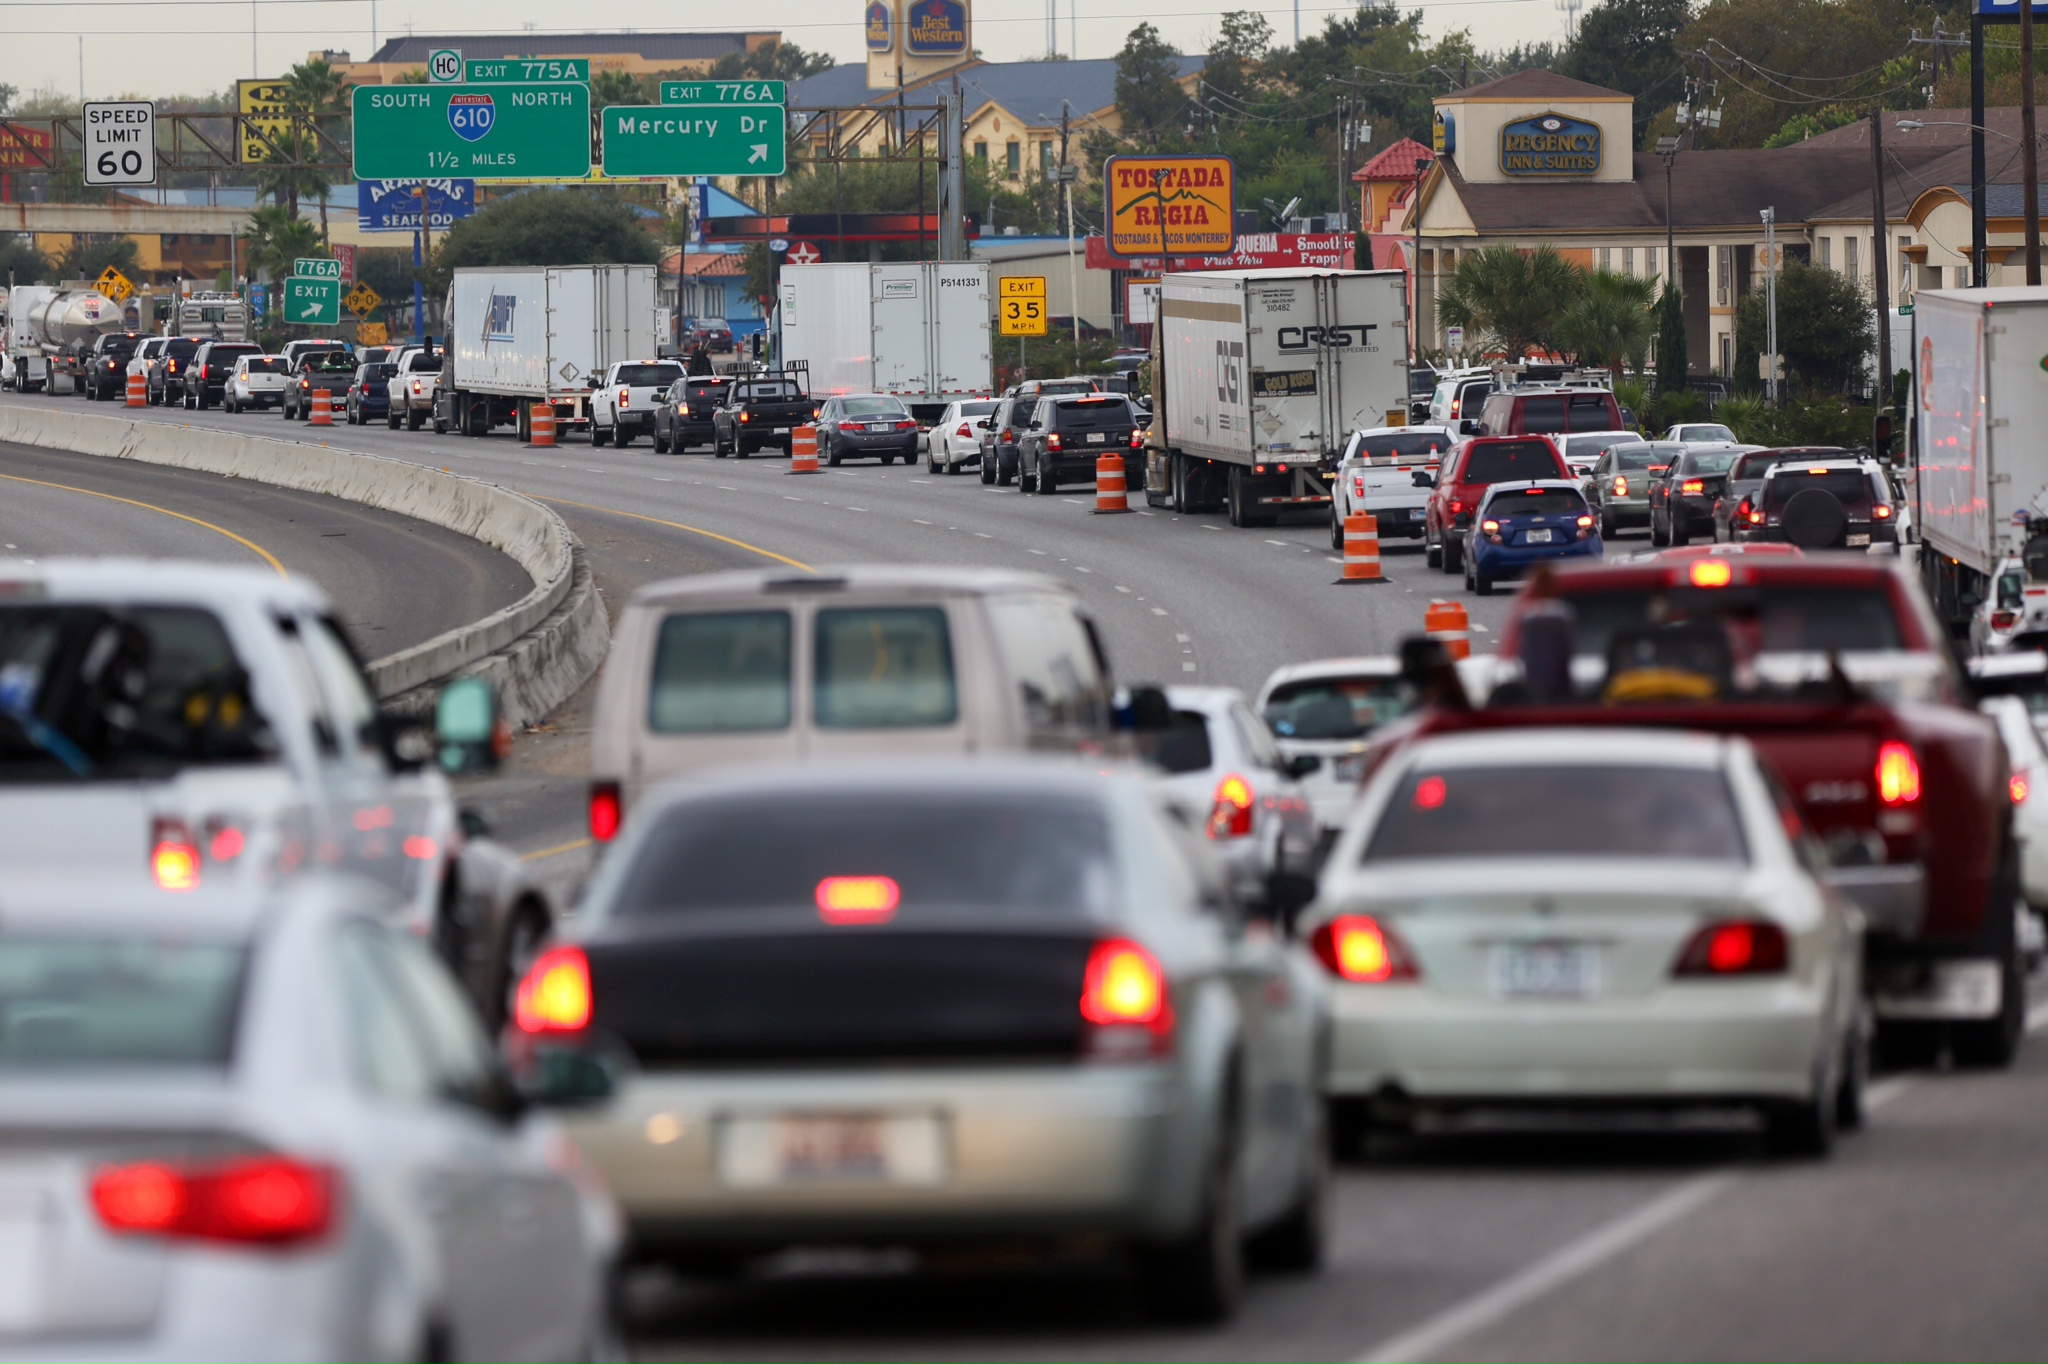 Yet another report finds Houston traffic worsening - Houston Chronicle